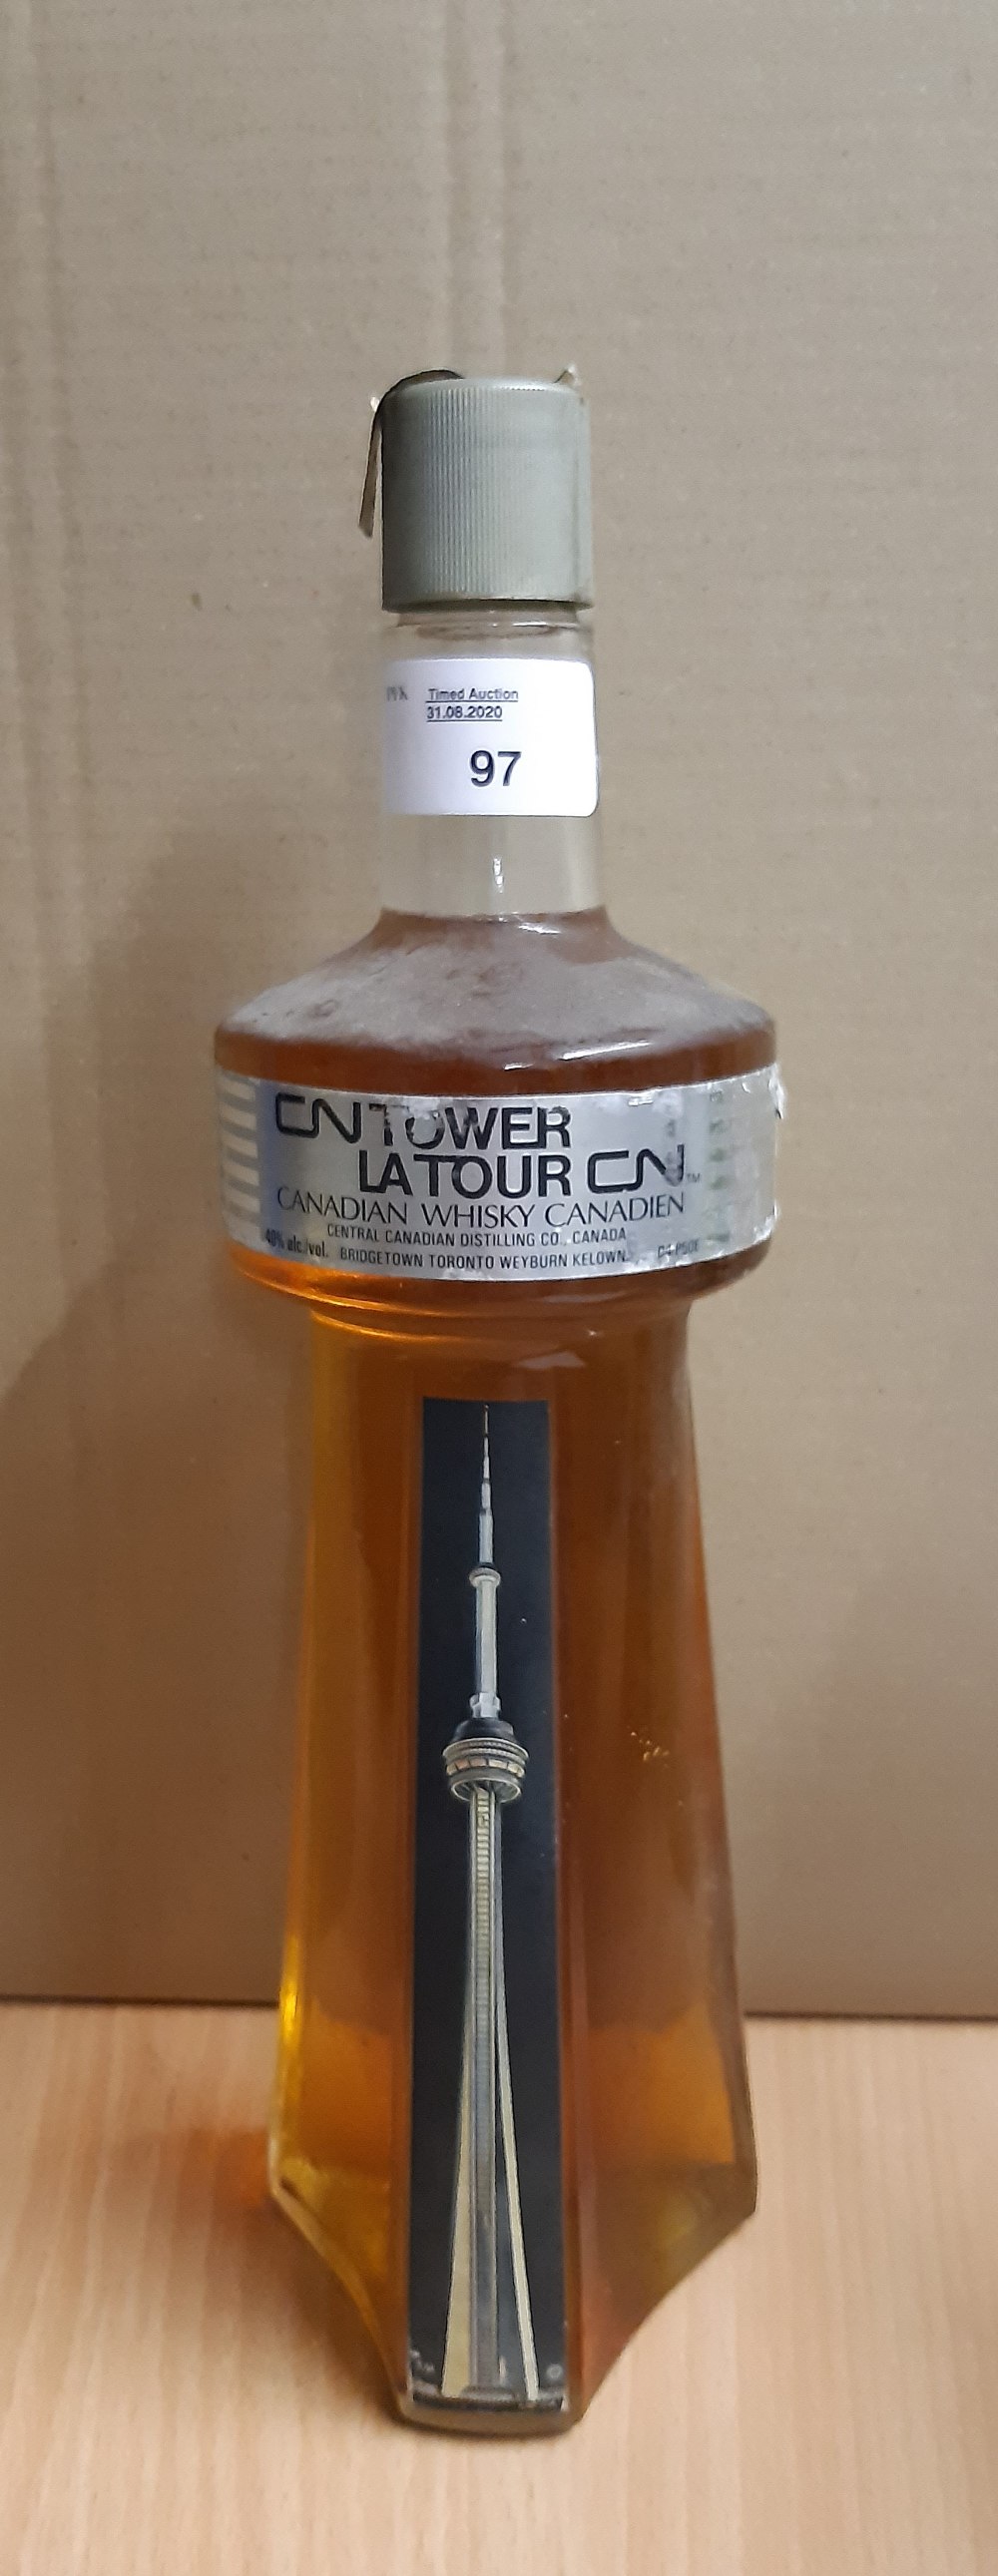 70cl bottle McGuiness Distillers 'CN Tower' Canadian Whisky, apparently undated, code D4-P50E,